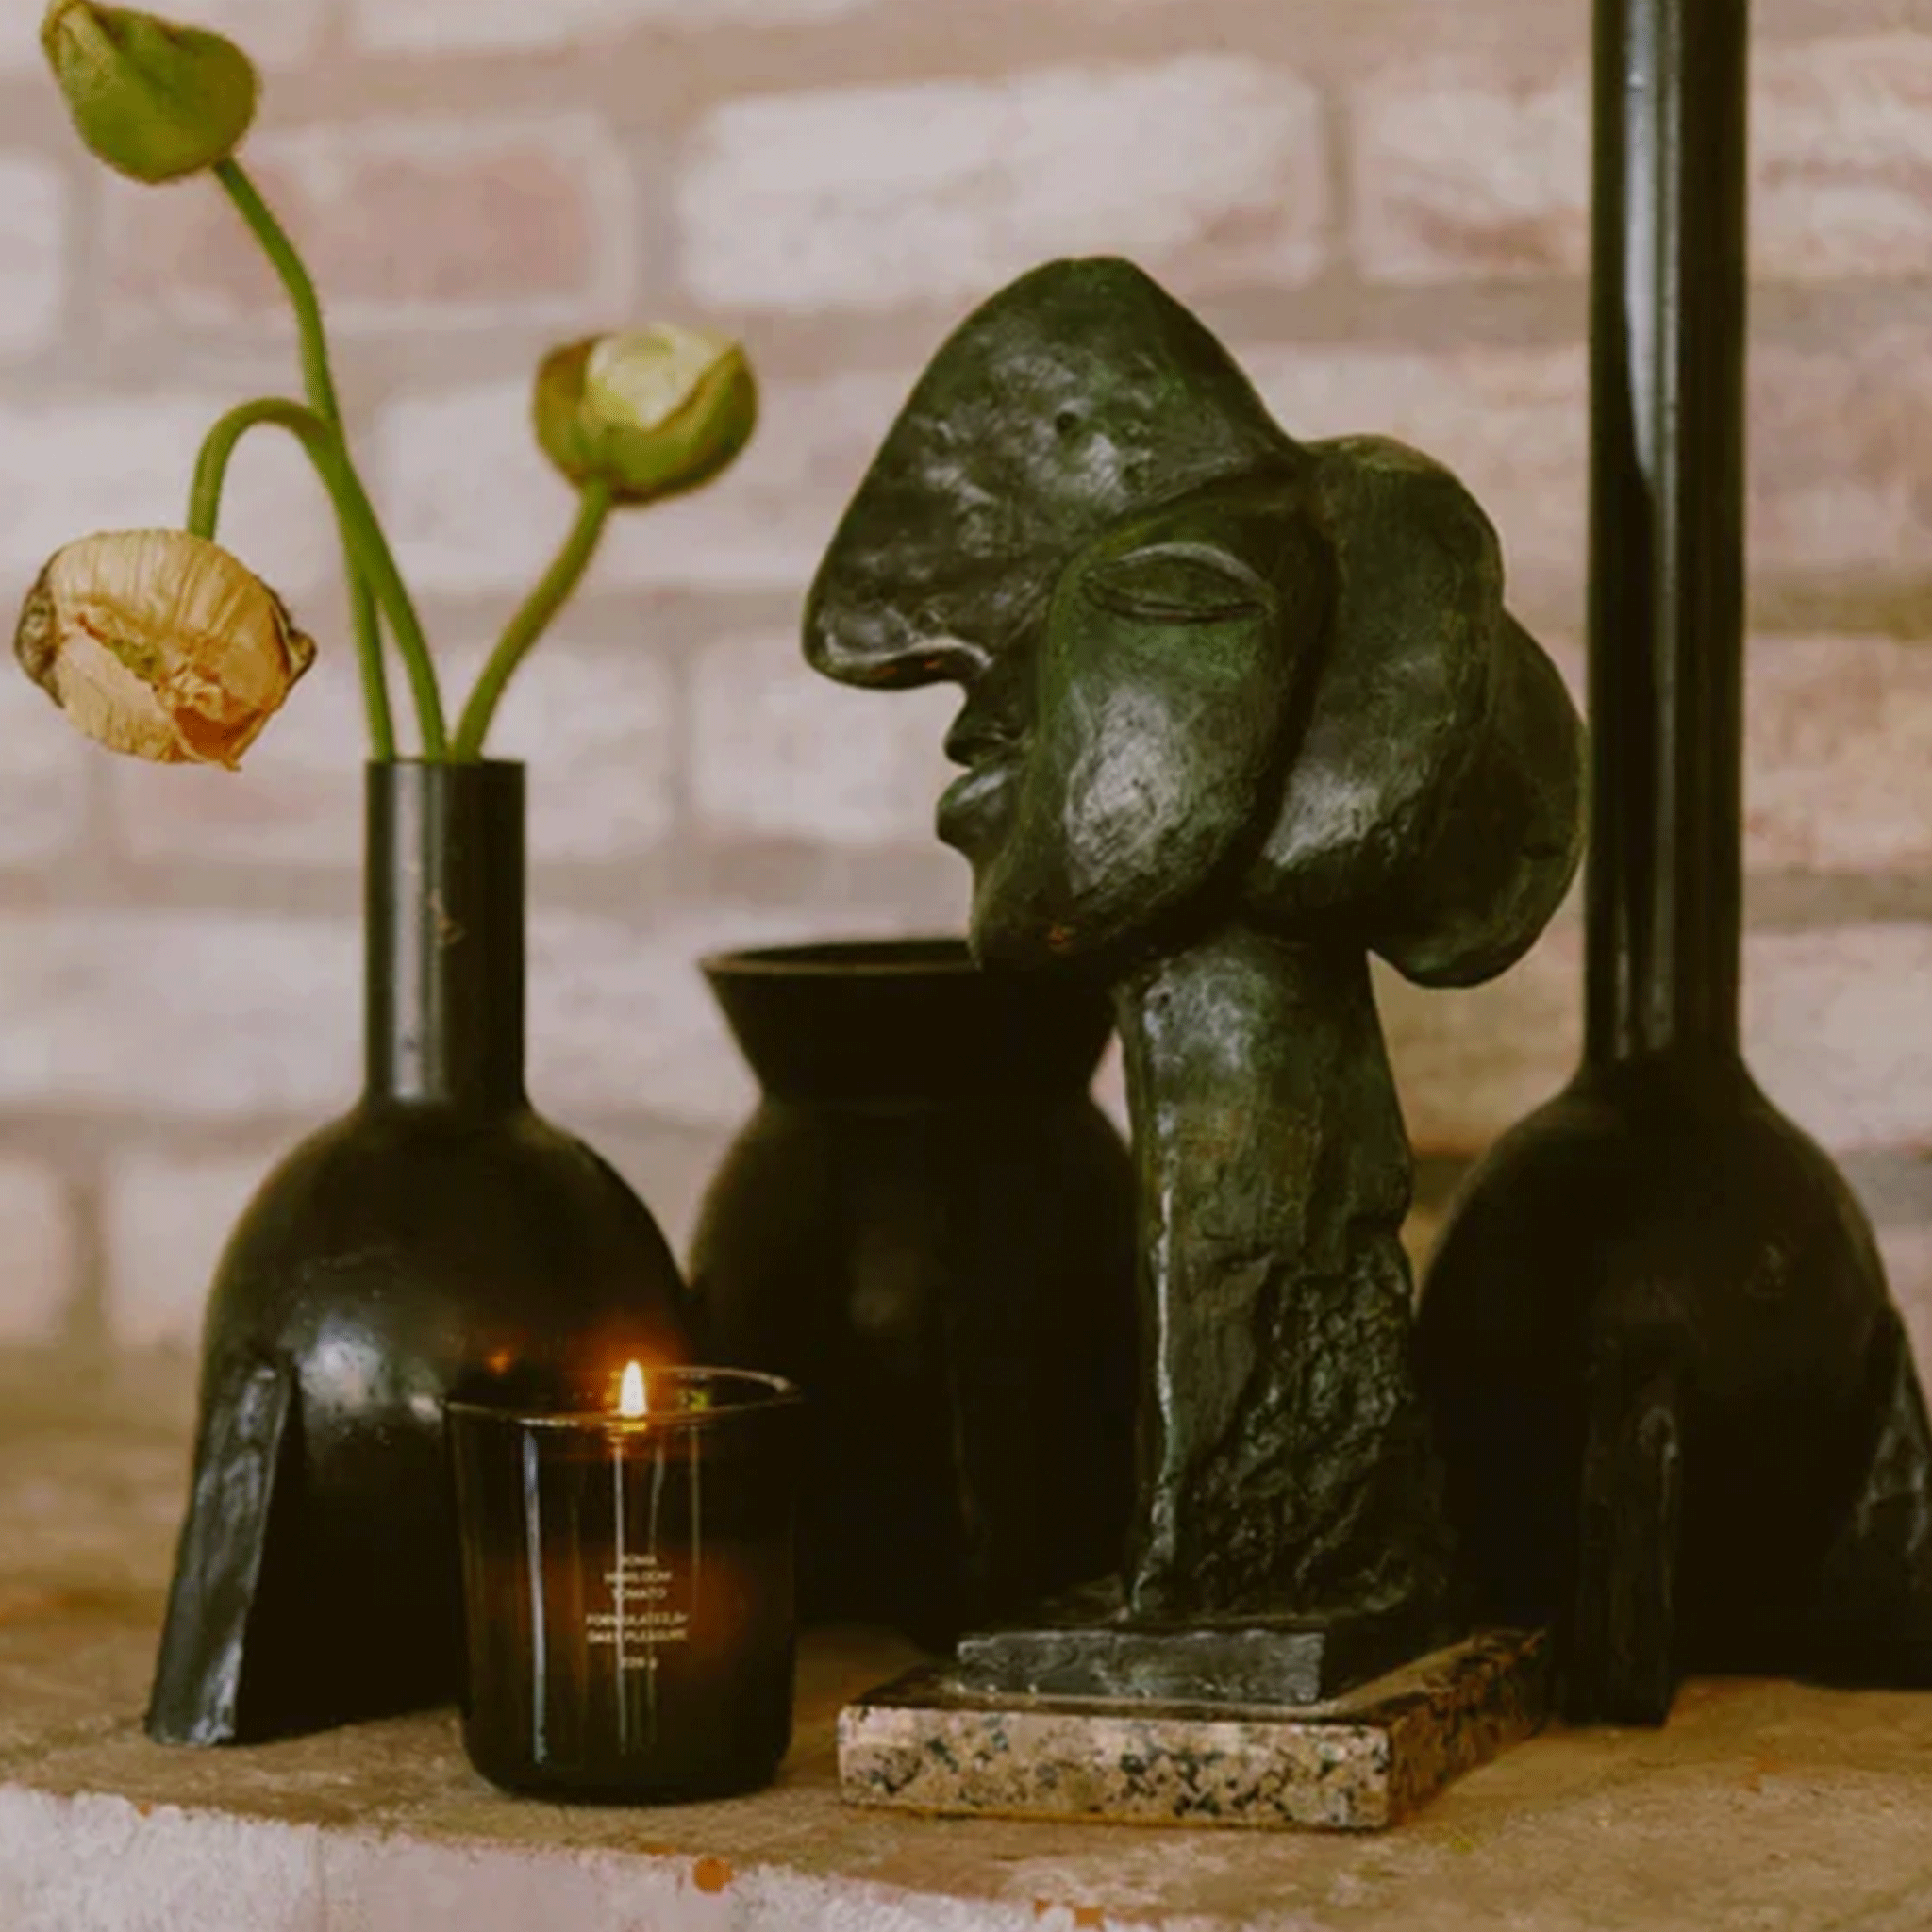 A green glass candle surrounded with other green figurines and vases. 